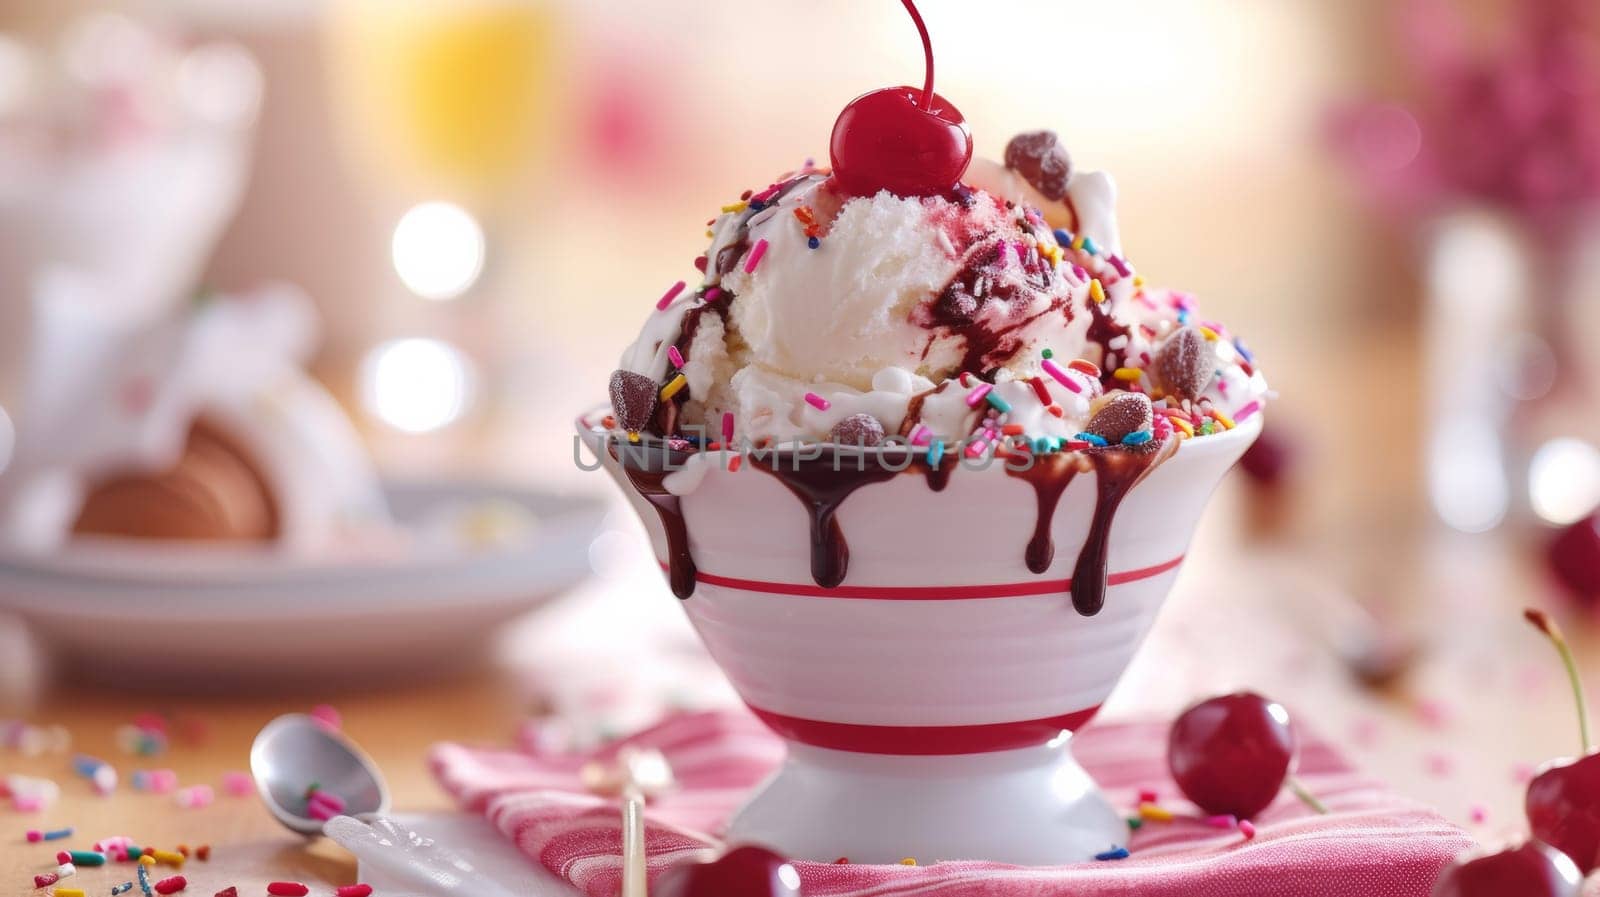 A bowl of ice cream with sprinkles and cherries on top